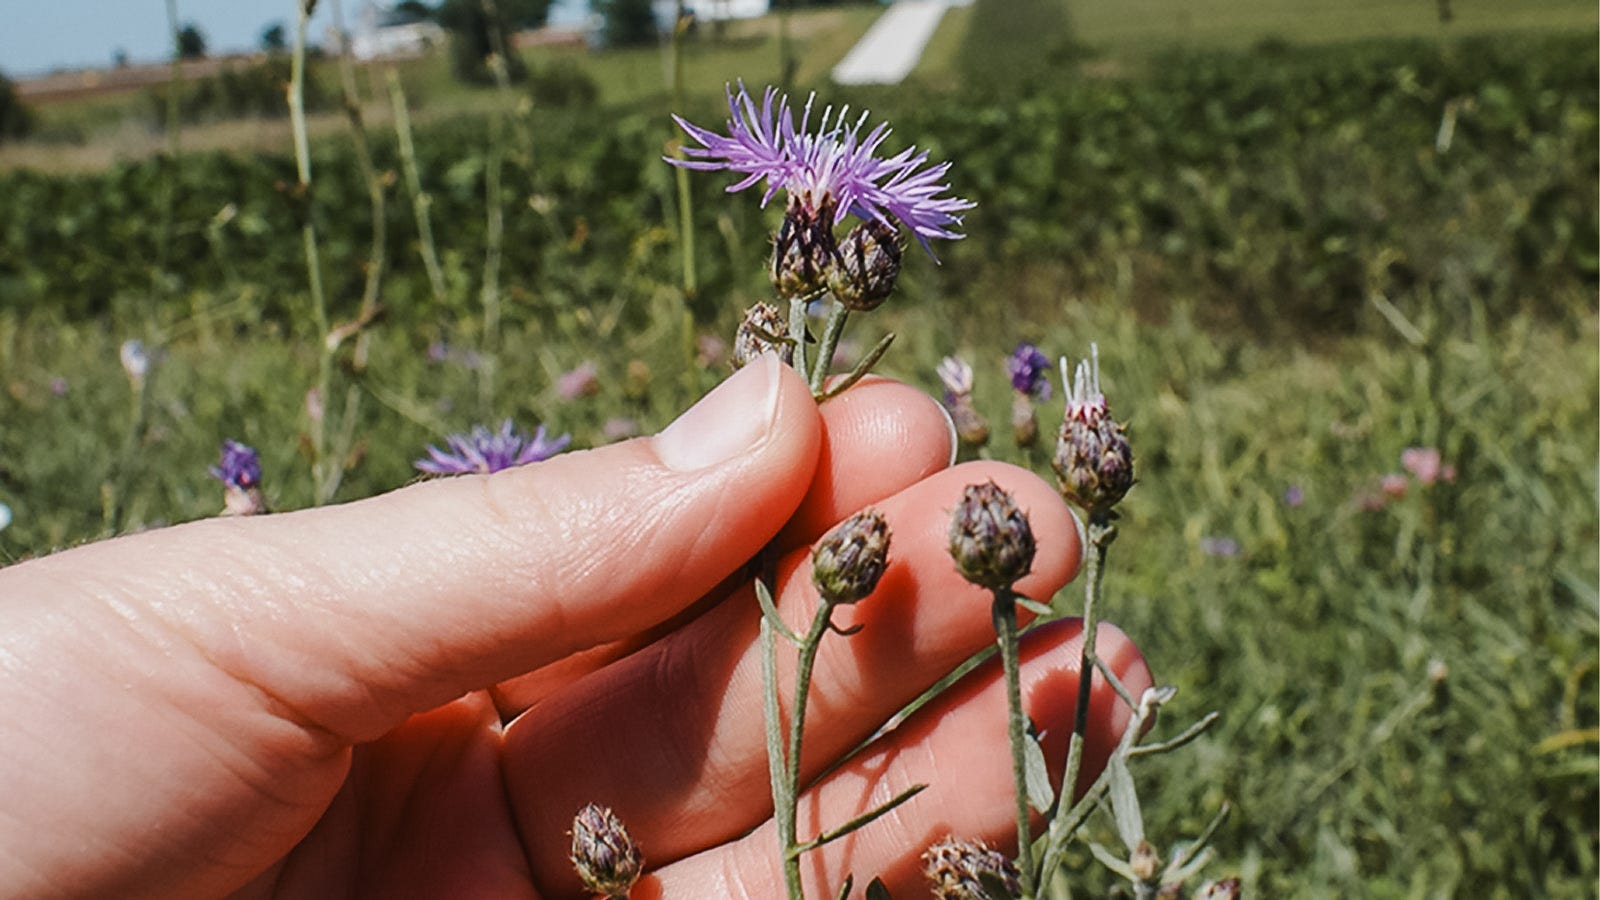 How to Kill Knapweed: A Noxious Weed Found in Yards, Pastures and Forests